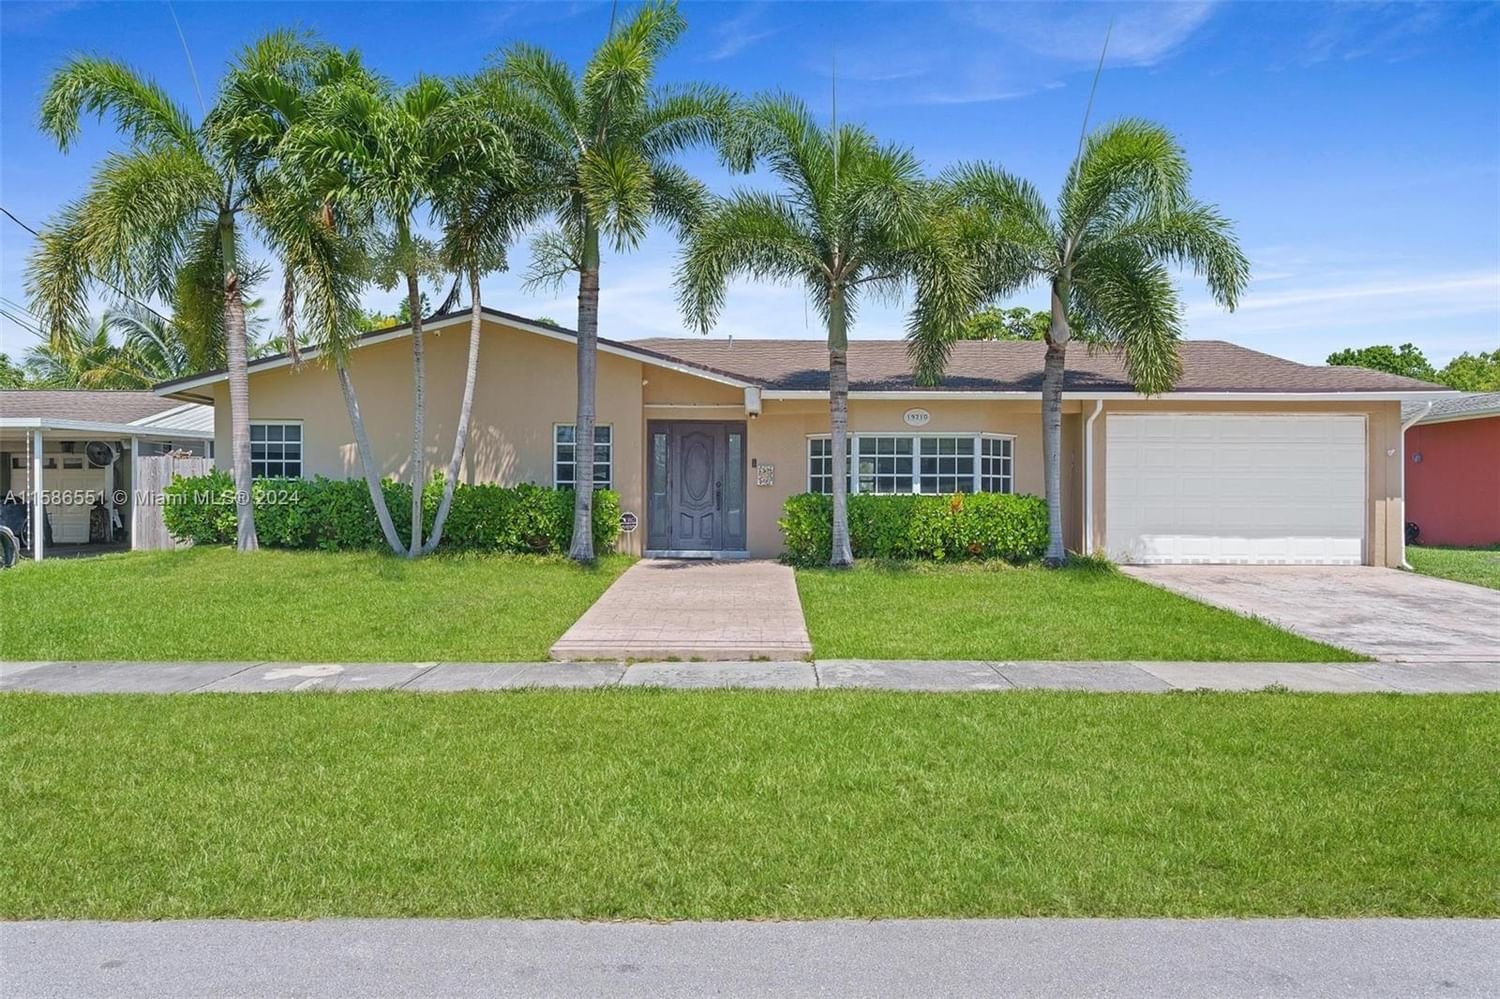 Real estate property located at 19210 Bel Aire Dr, Miami-Dade County, BEL AIRE SEC 3, Cutler Bay, FL